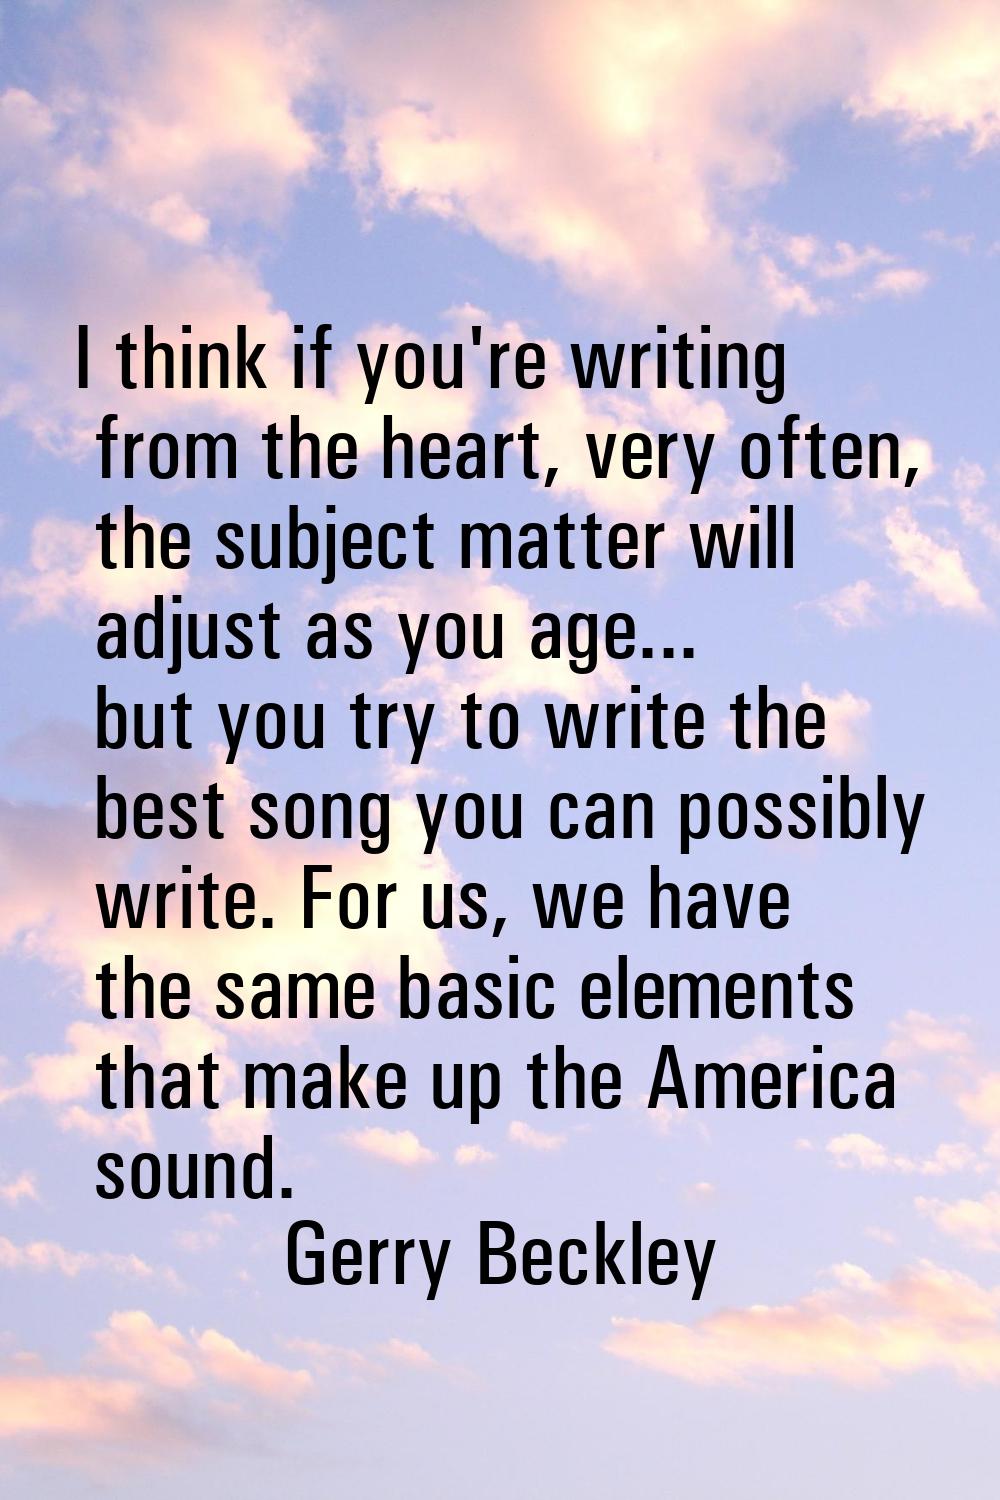 I think if you're writing from the heart, very often, the subject matter will adjust as you age... 